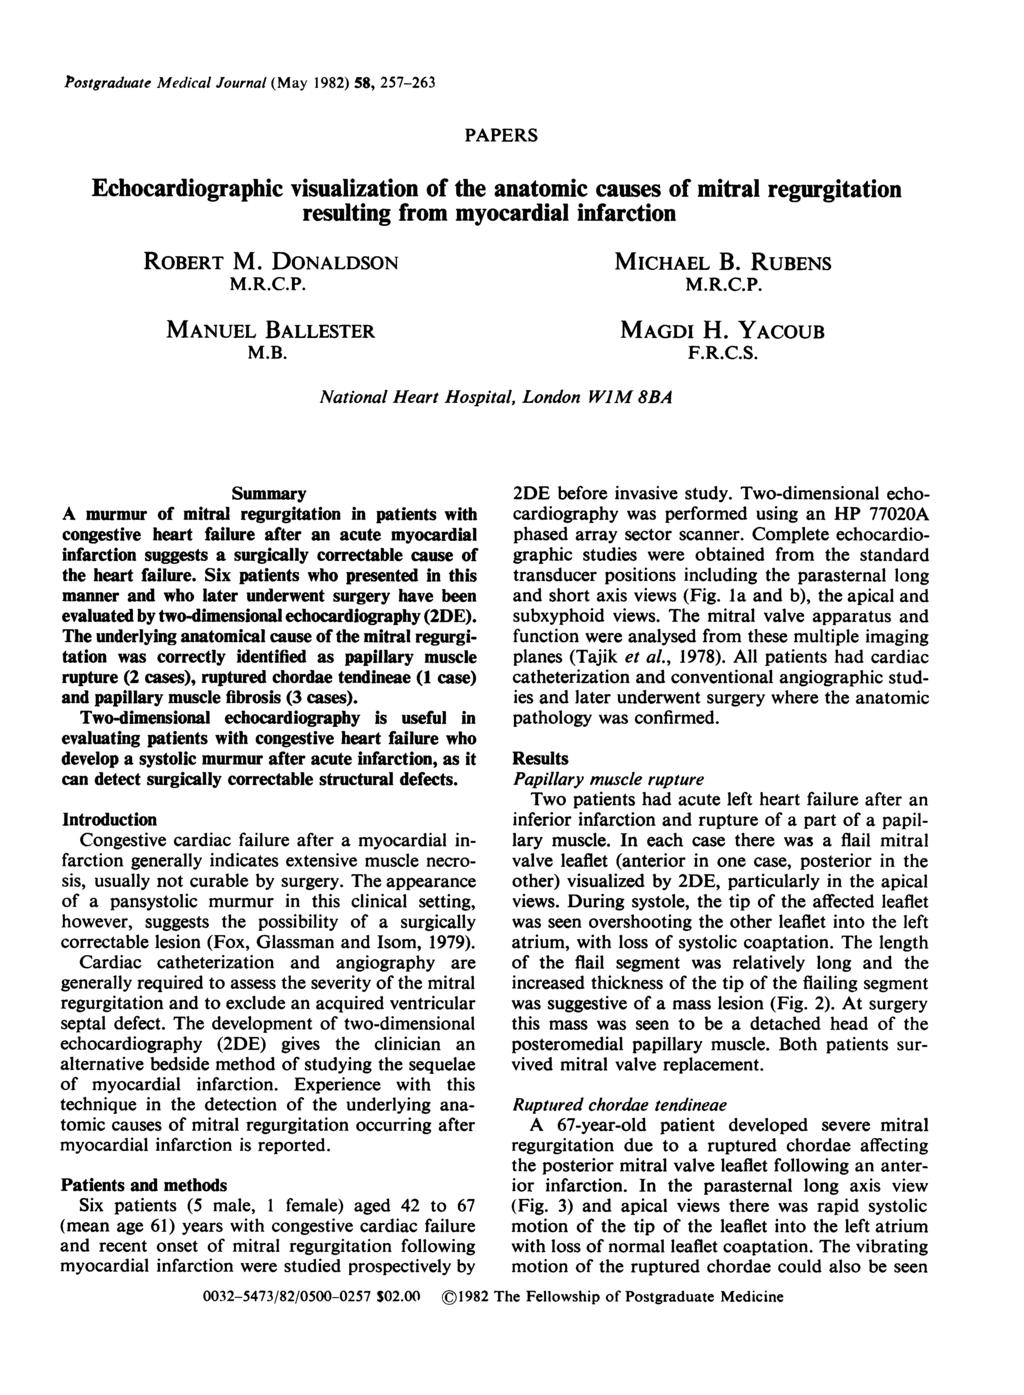 Postgraduate Medical Journal (May 1982) 58, 257-263 PAPERS Echocardiographic visualization of the anatomic causes of mitral regurgitation resulting from myocardial infarction ROBERT M. DONALDSON M.R.C.